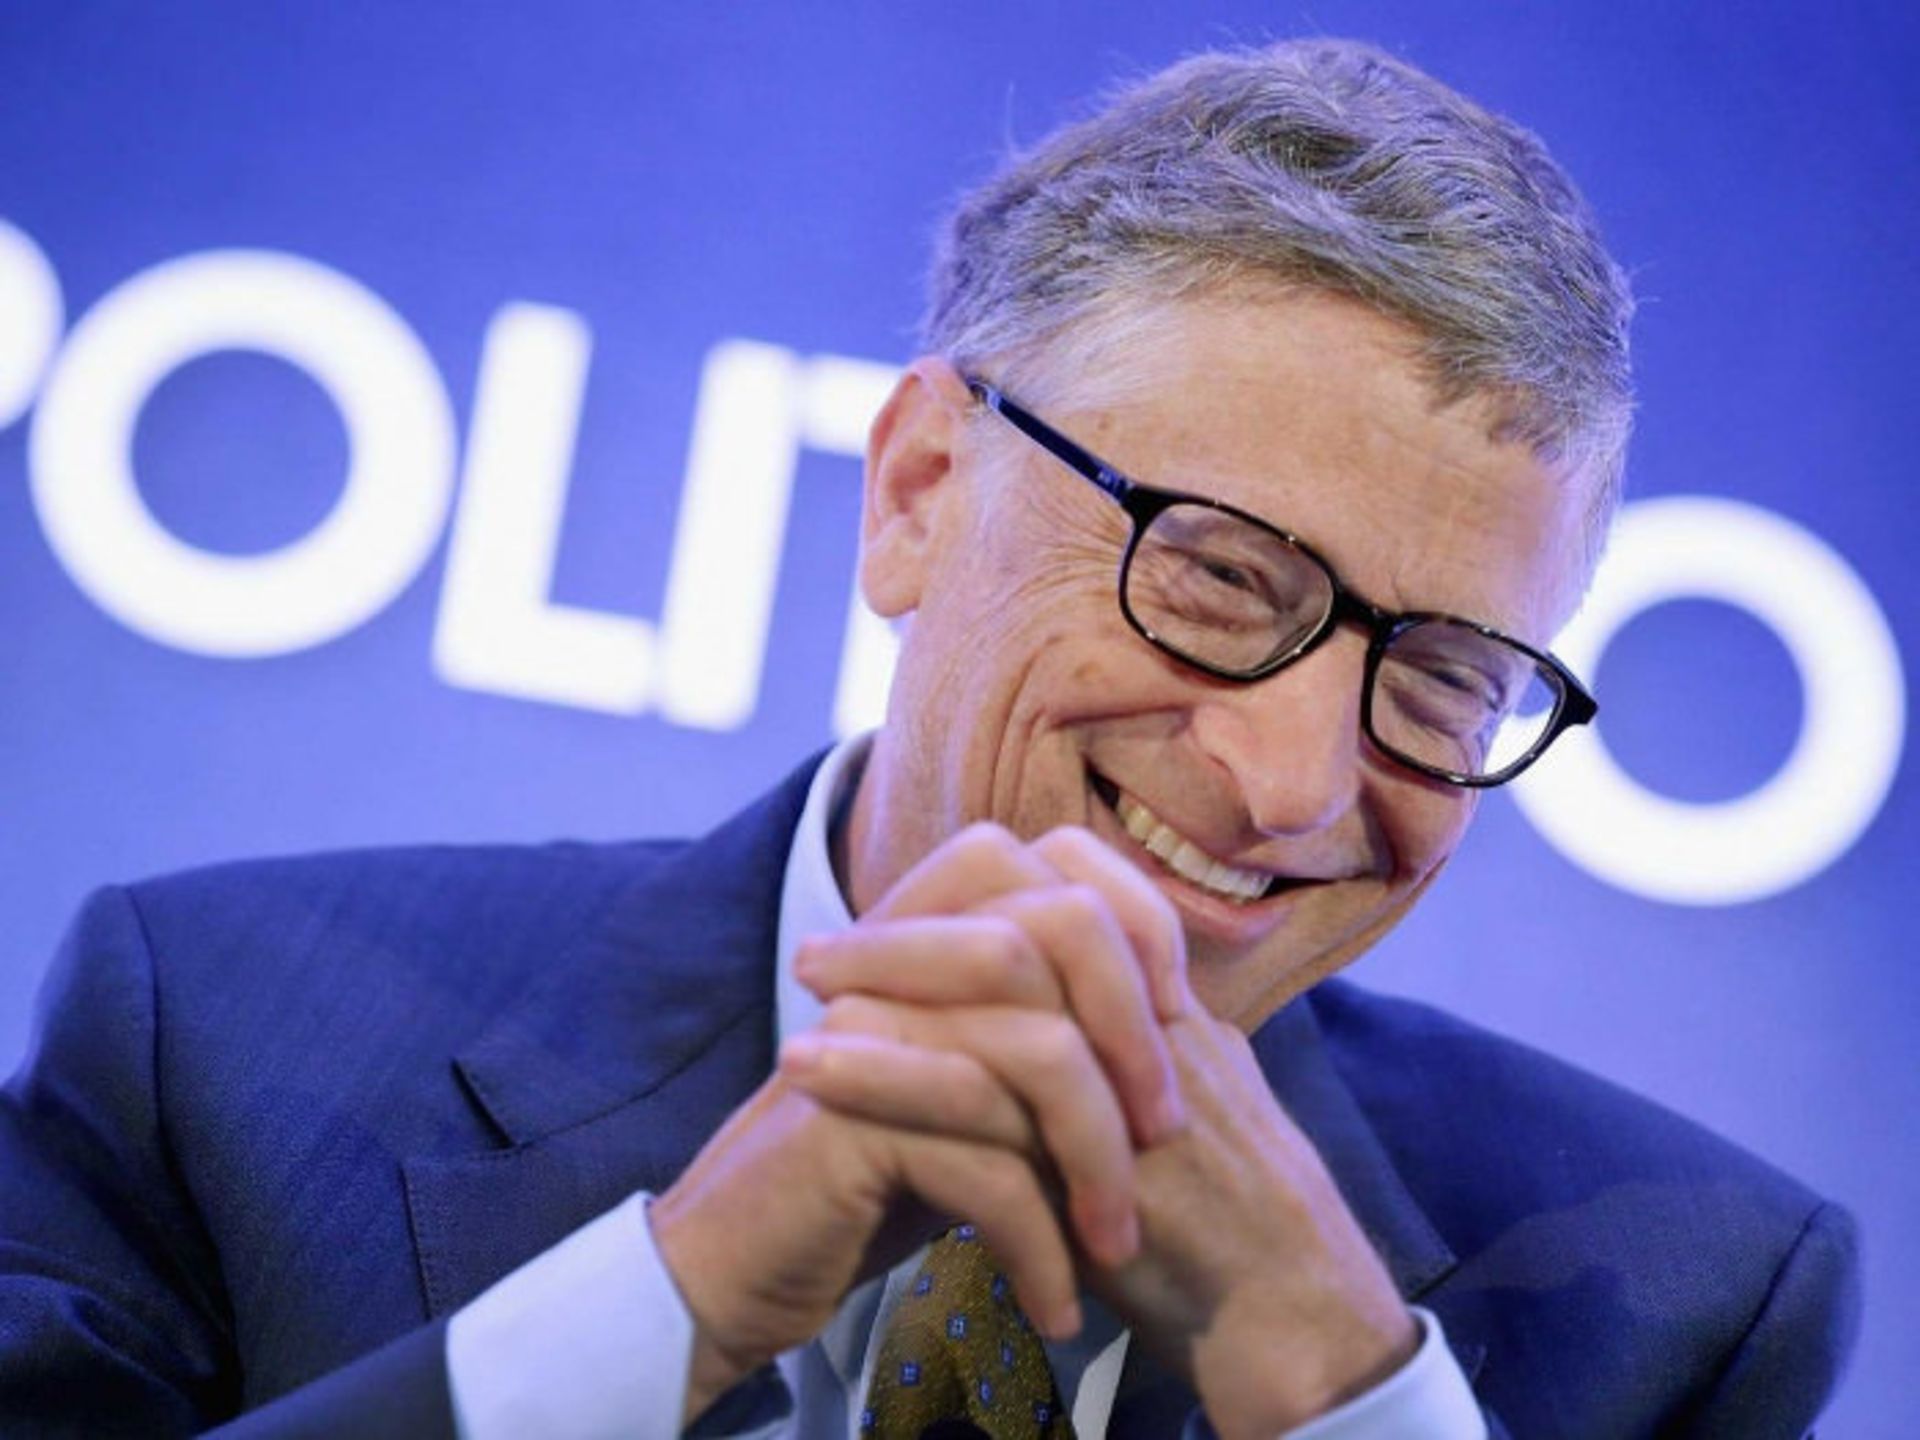 1-bill-gates-is-the-cofounder-of-microsoft-and-the-richest-person-in-the-world